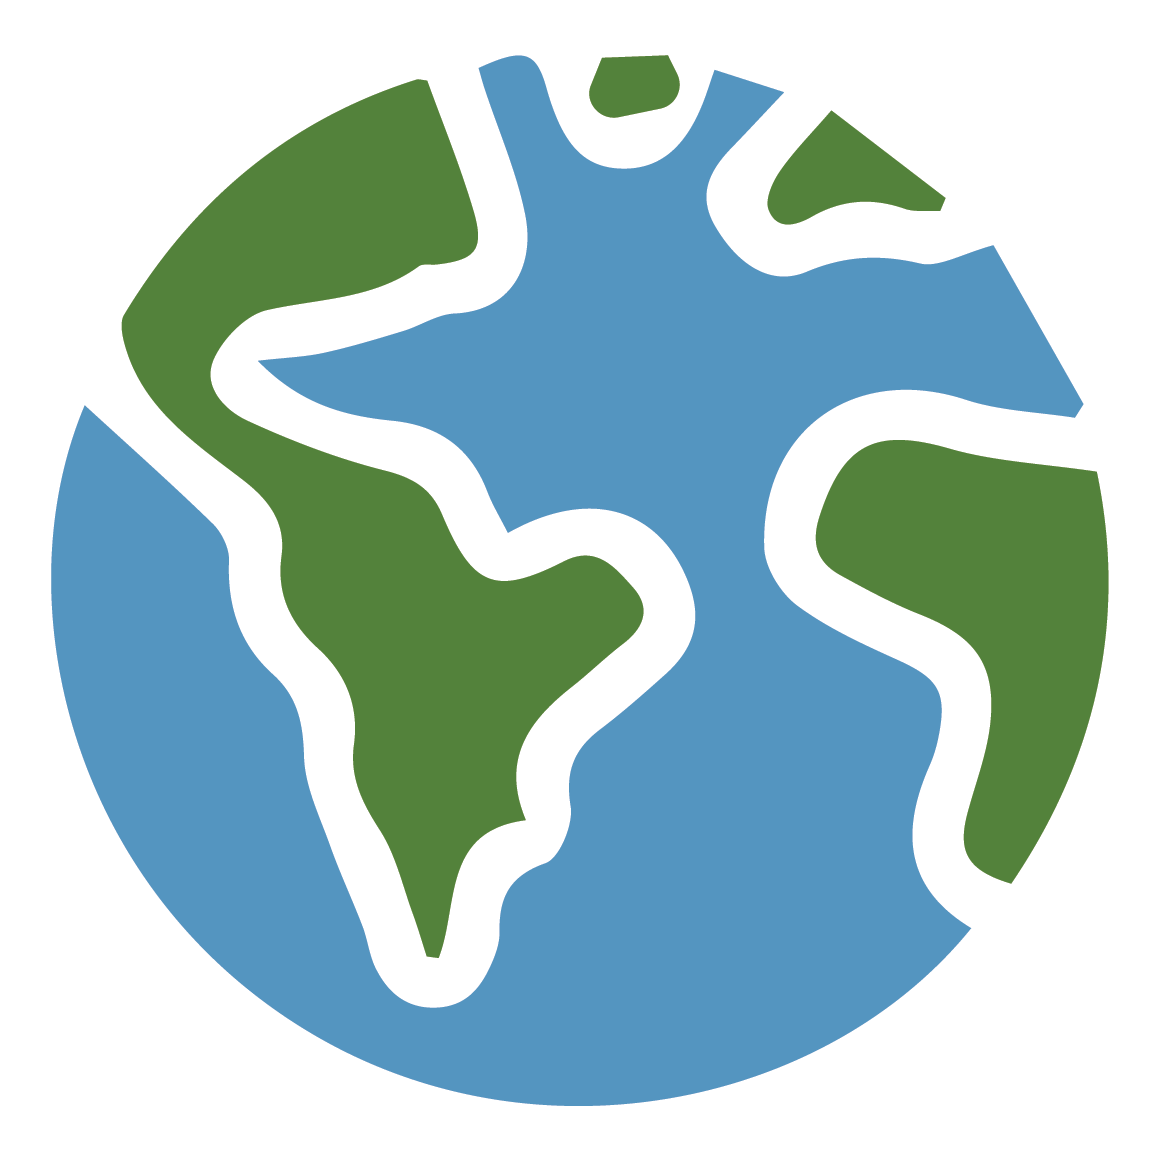 One of the climate-friendly icons - a blue and green Earth